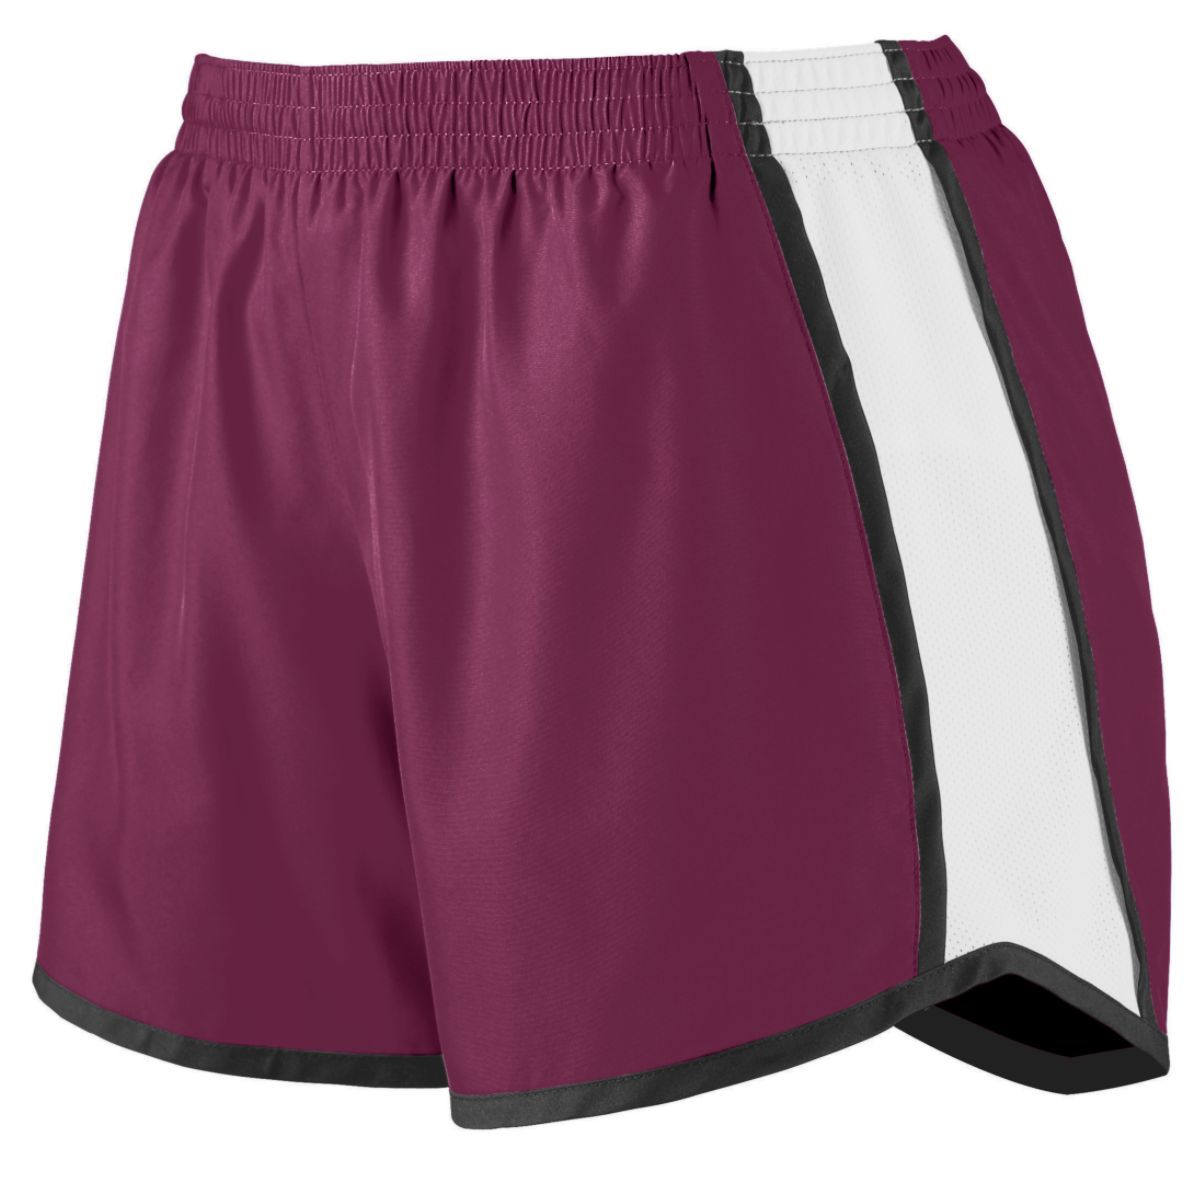 Augusta Sportswear Girls Pulse Team Shorts in Maroon/White/Black  -Part of the Girls, Augusta-Products, Volleyball, Girls-Shorts product lines at KanaleyCreations.com